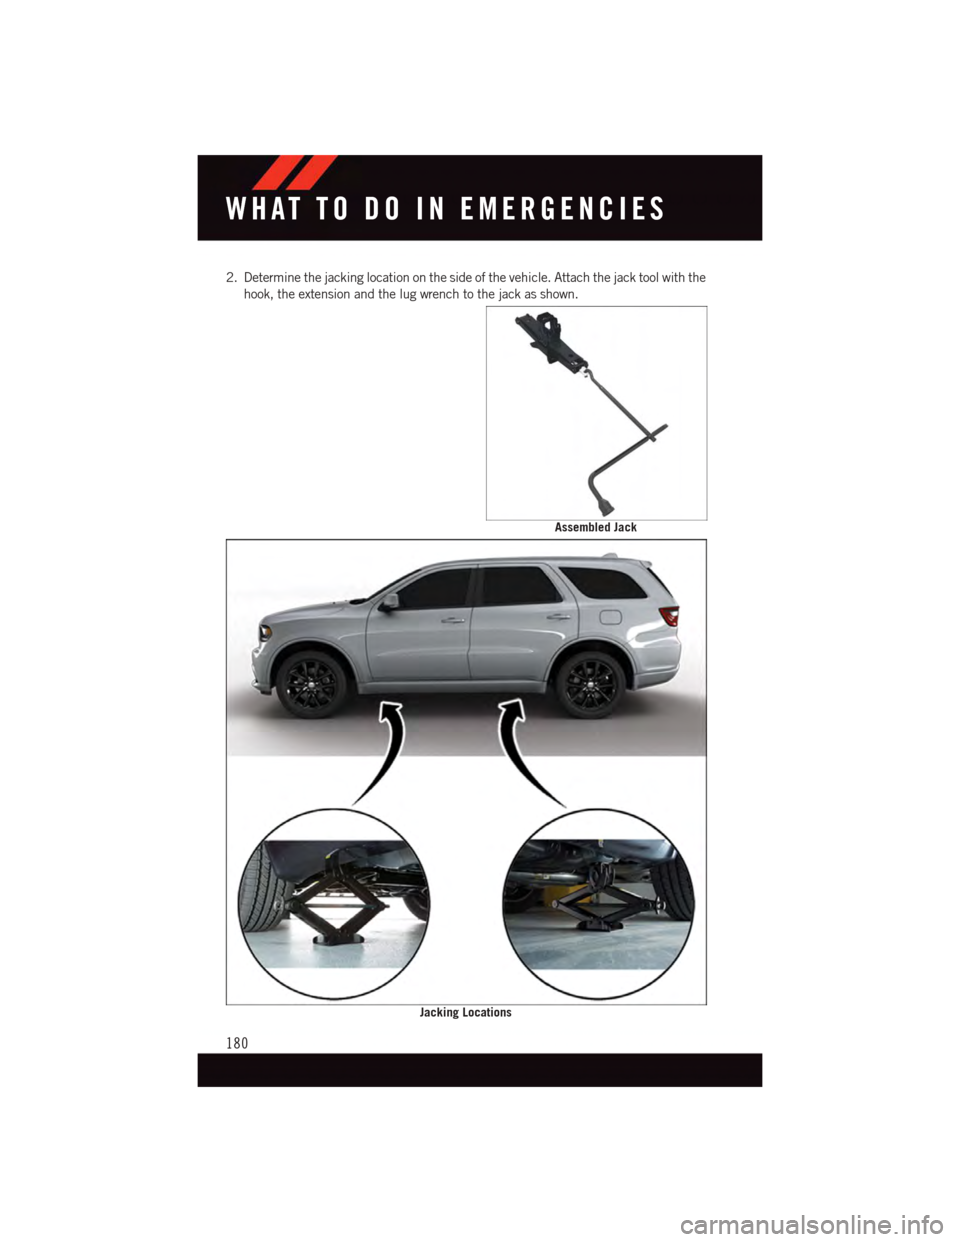 DODGE DURANGO 2015 3.G User Guide 2. Determine the jacking location on the side of the vehicle. Attach the jack tool with the
hook, the extension and the lug wrench to the jack as shown.
Assembled Jack
Jacking Locations
WHAT TO DO IN 